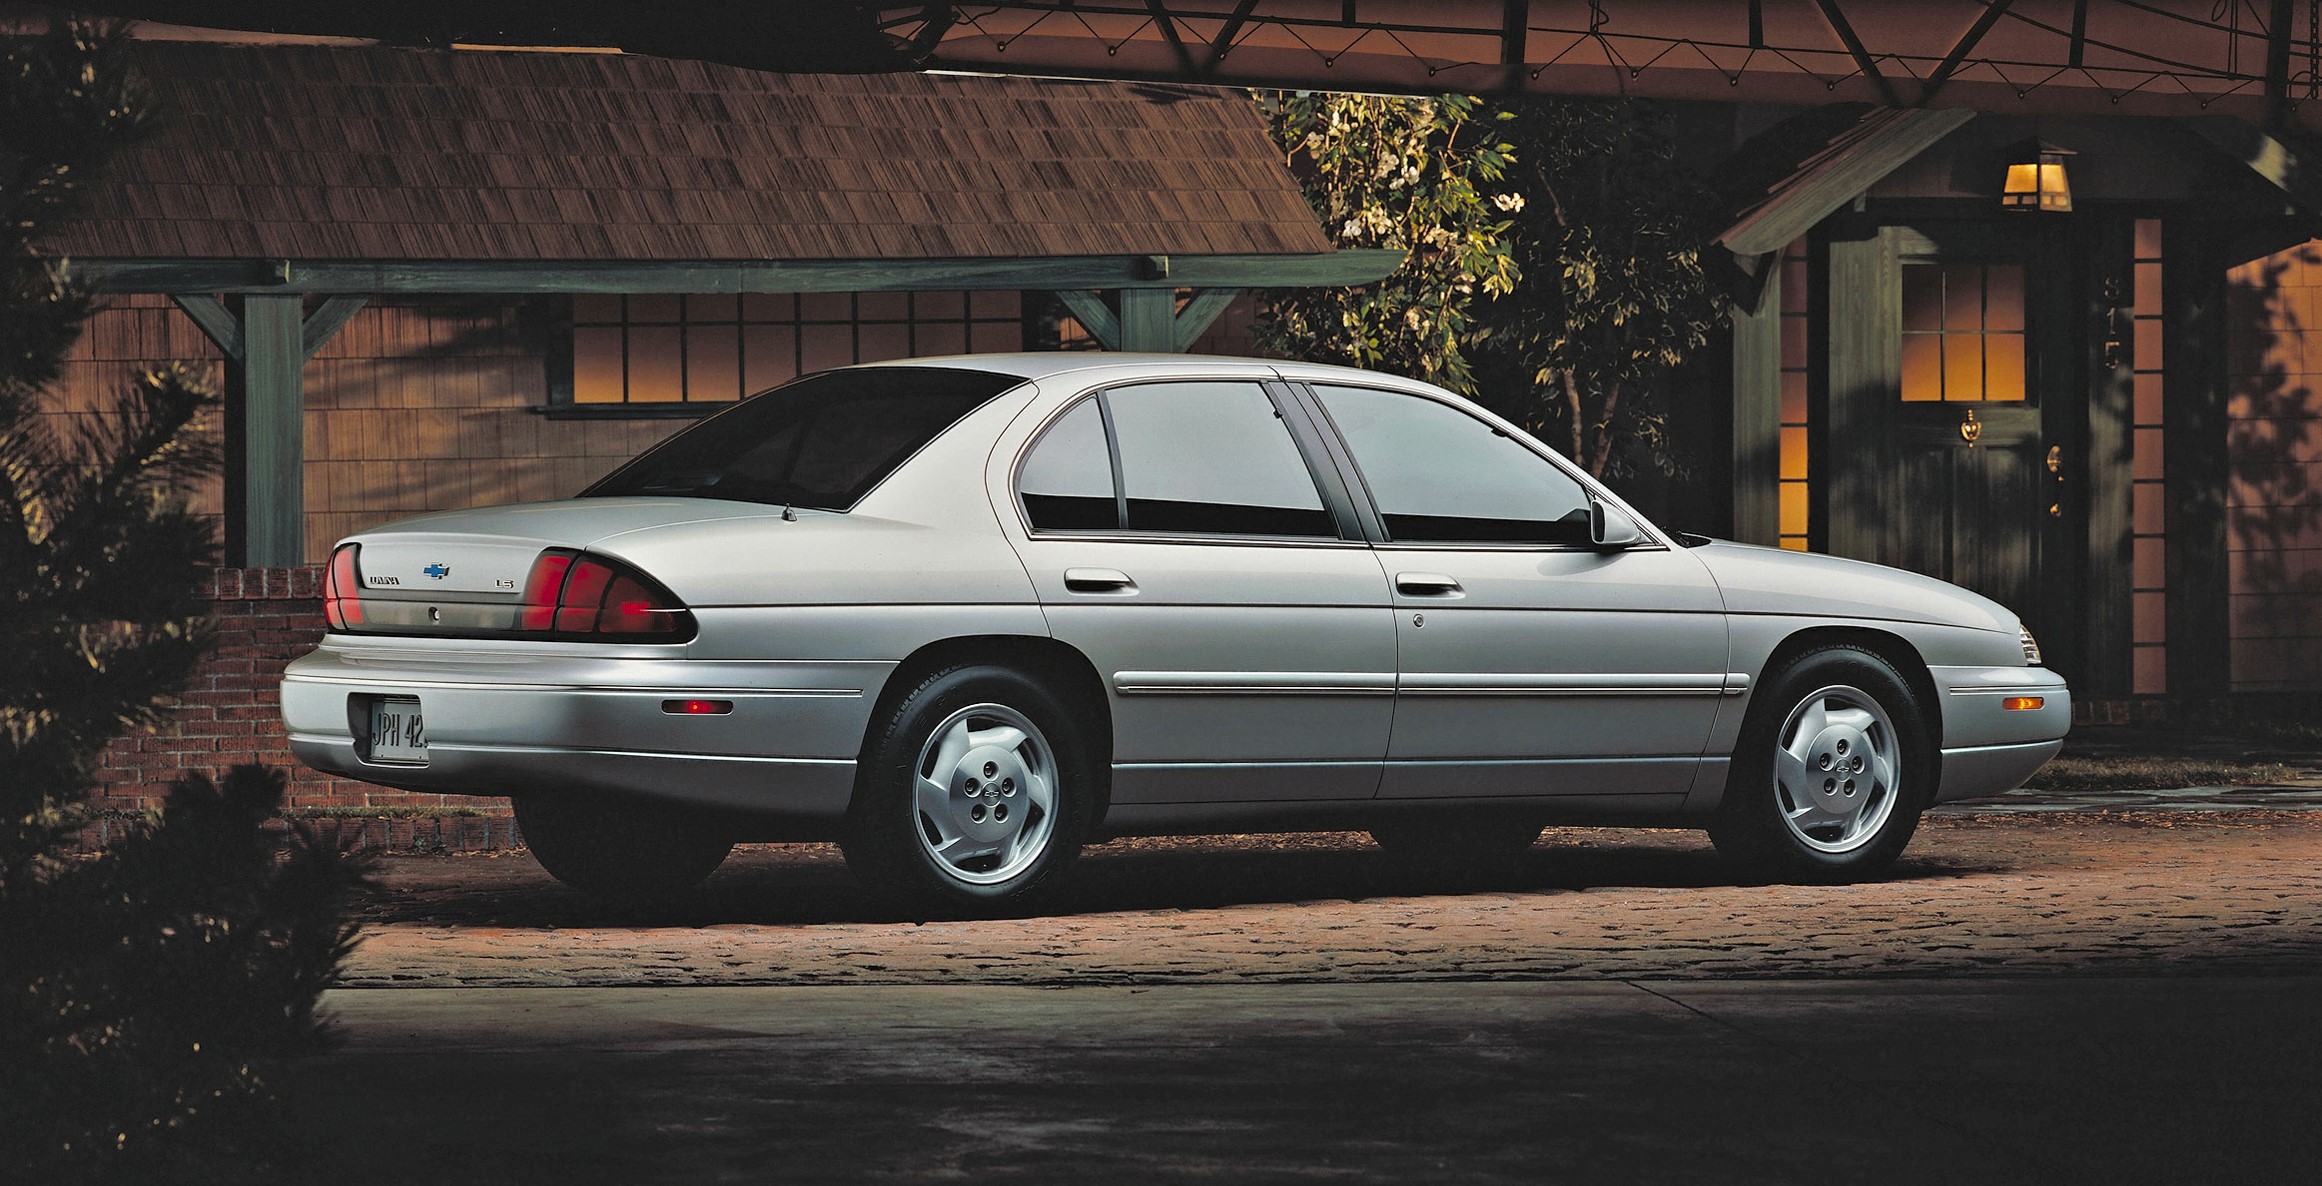 1998 Chevrolet Lumina Owner Gets Car Restored Twice | GM Authority